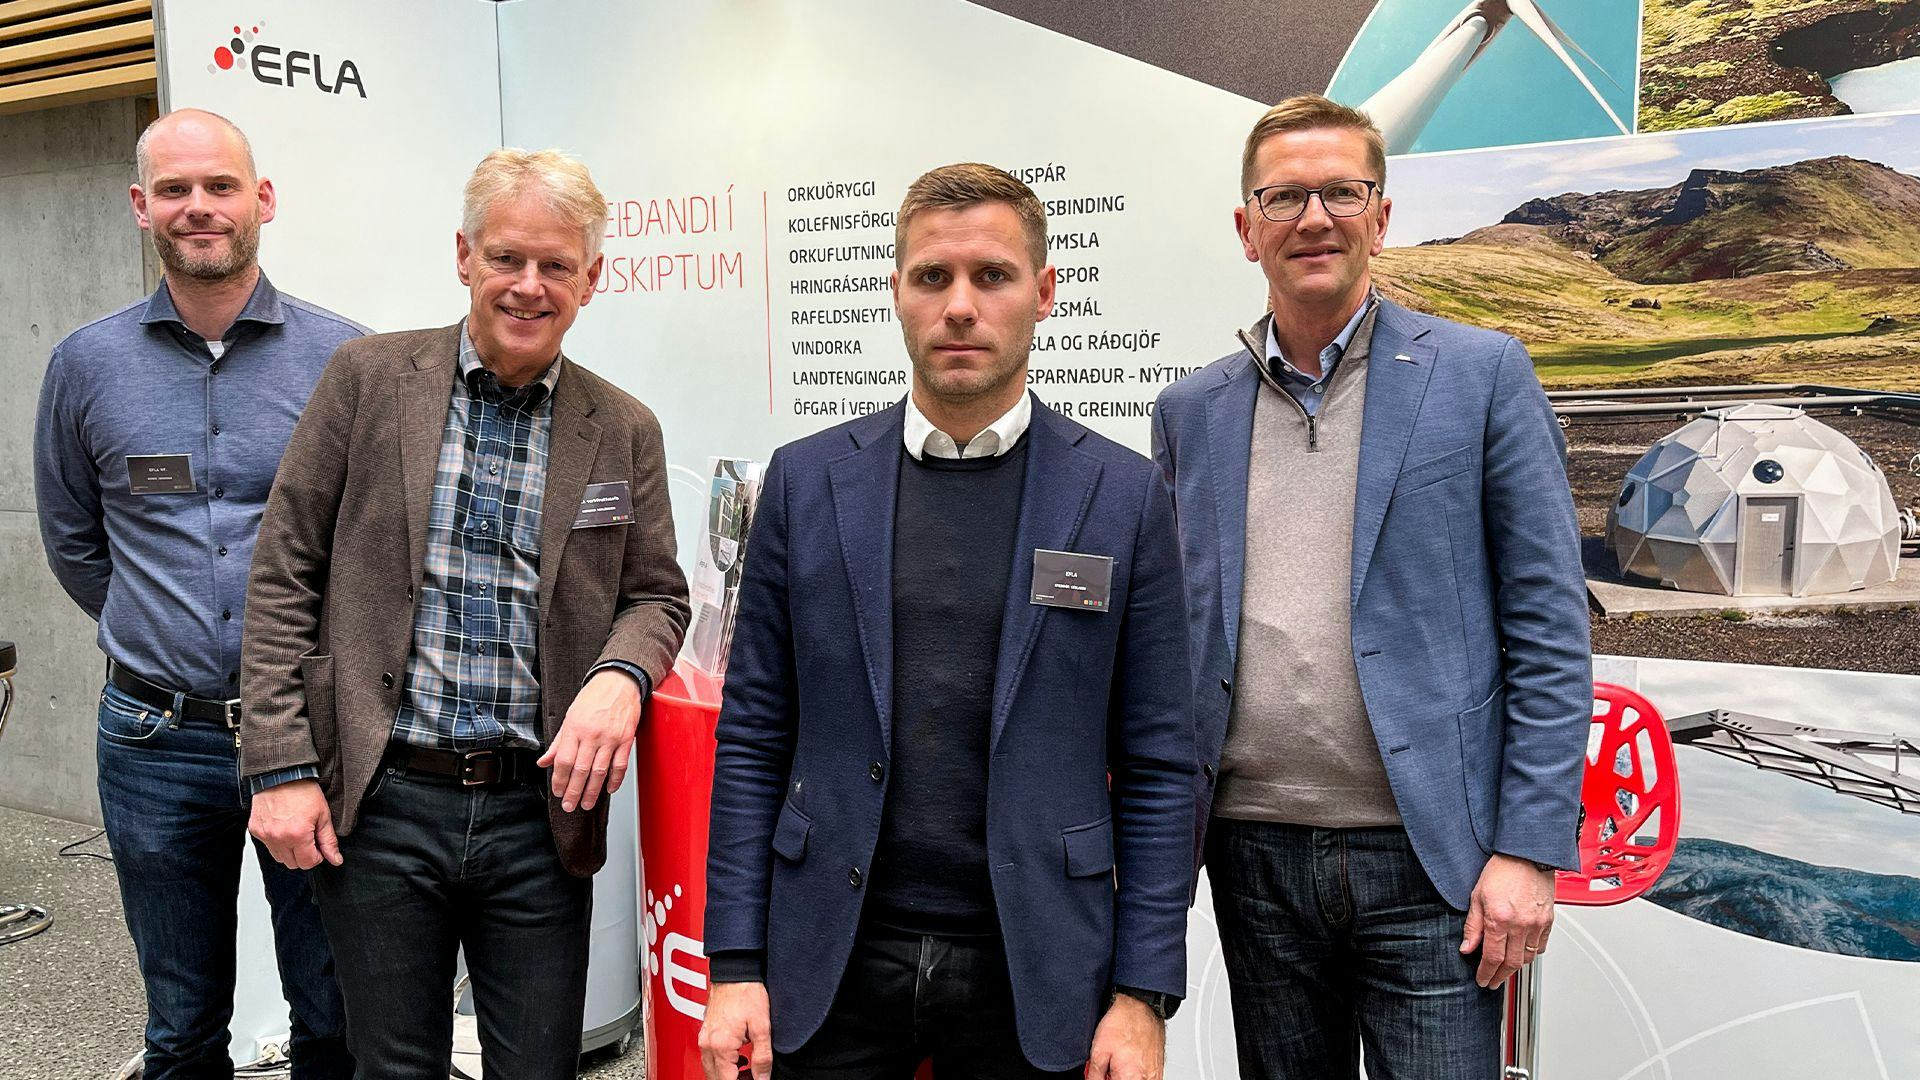 Four men standing in front of a backdrop with the EFLA logo and Icelandic text 